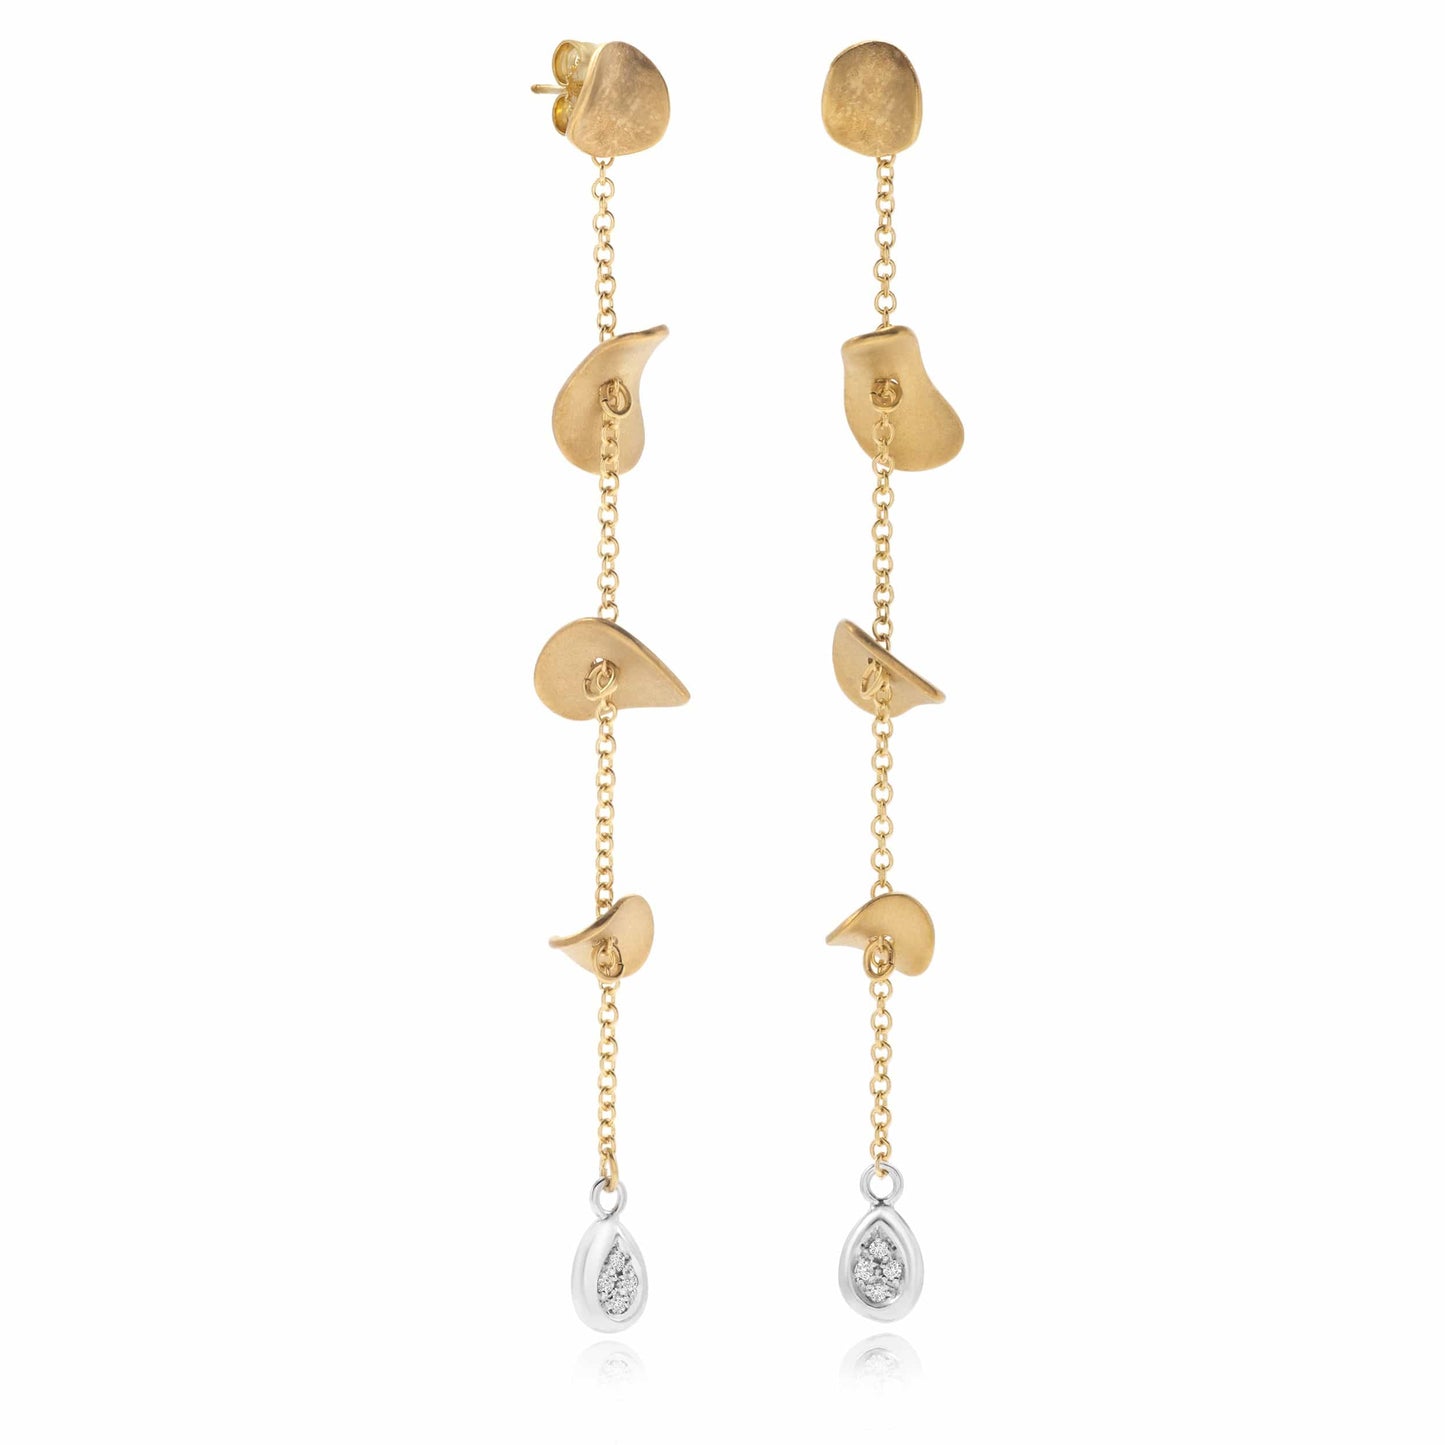 Dalia T Online Earrings Nature Collection 14KT Yellow Gold & White Diamonds Drops Earrings